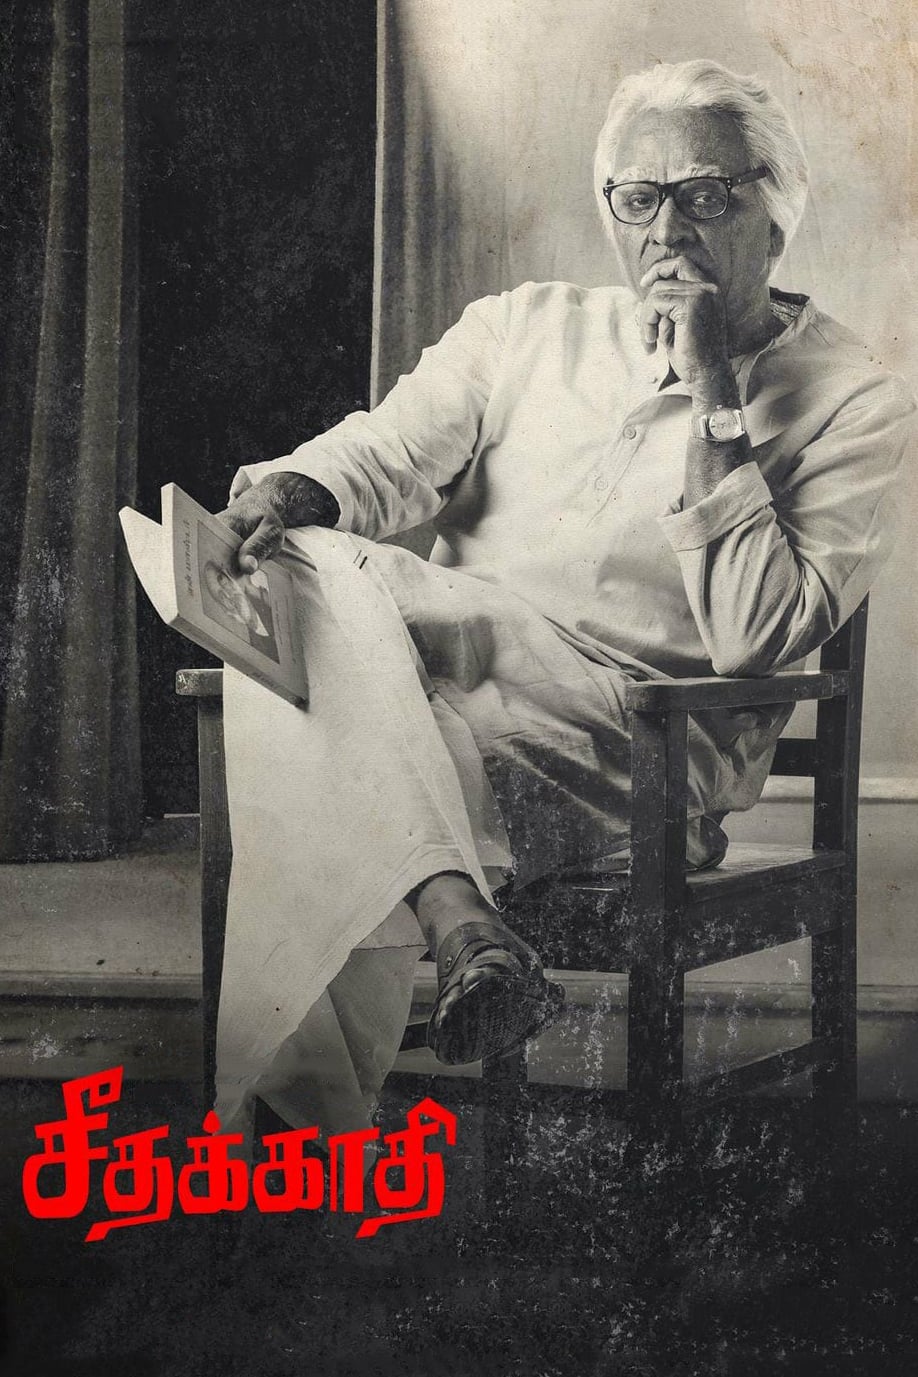 Poster for the movie "Seethakathi"